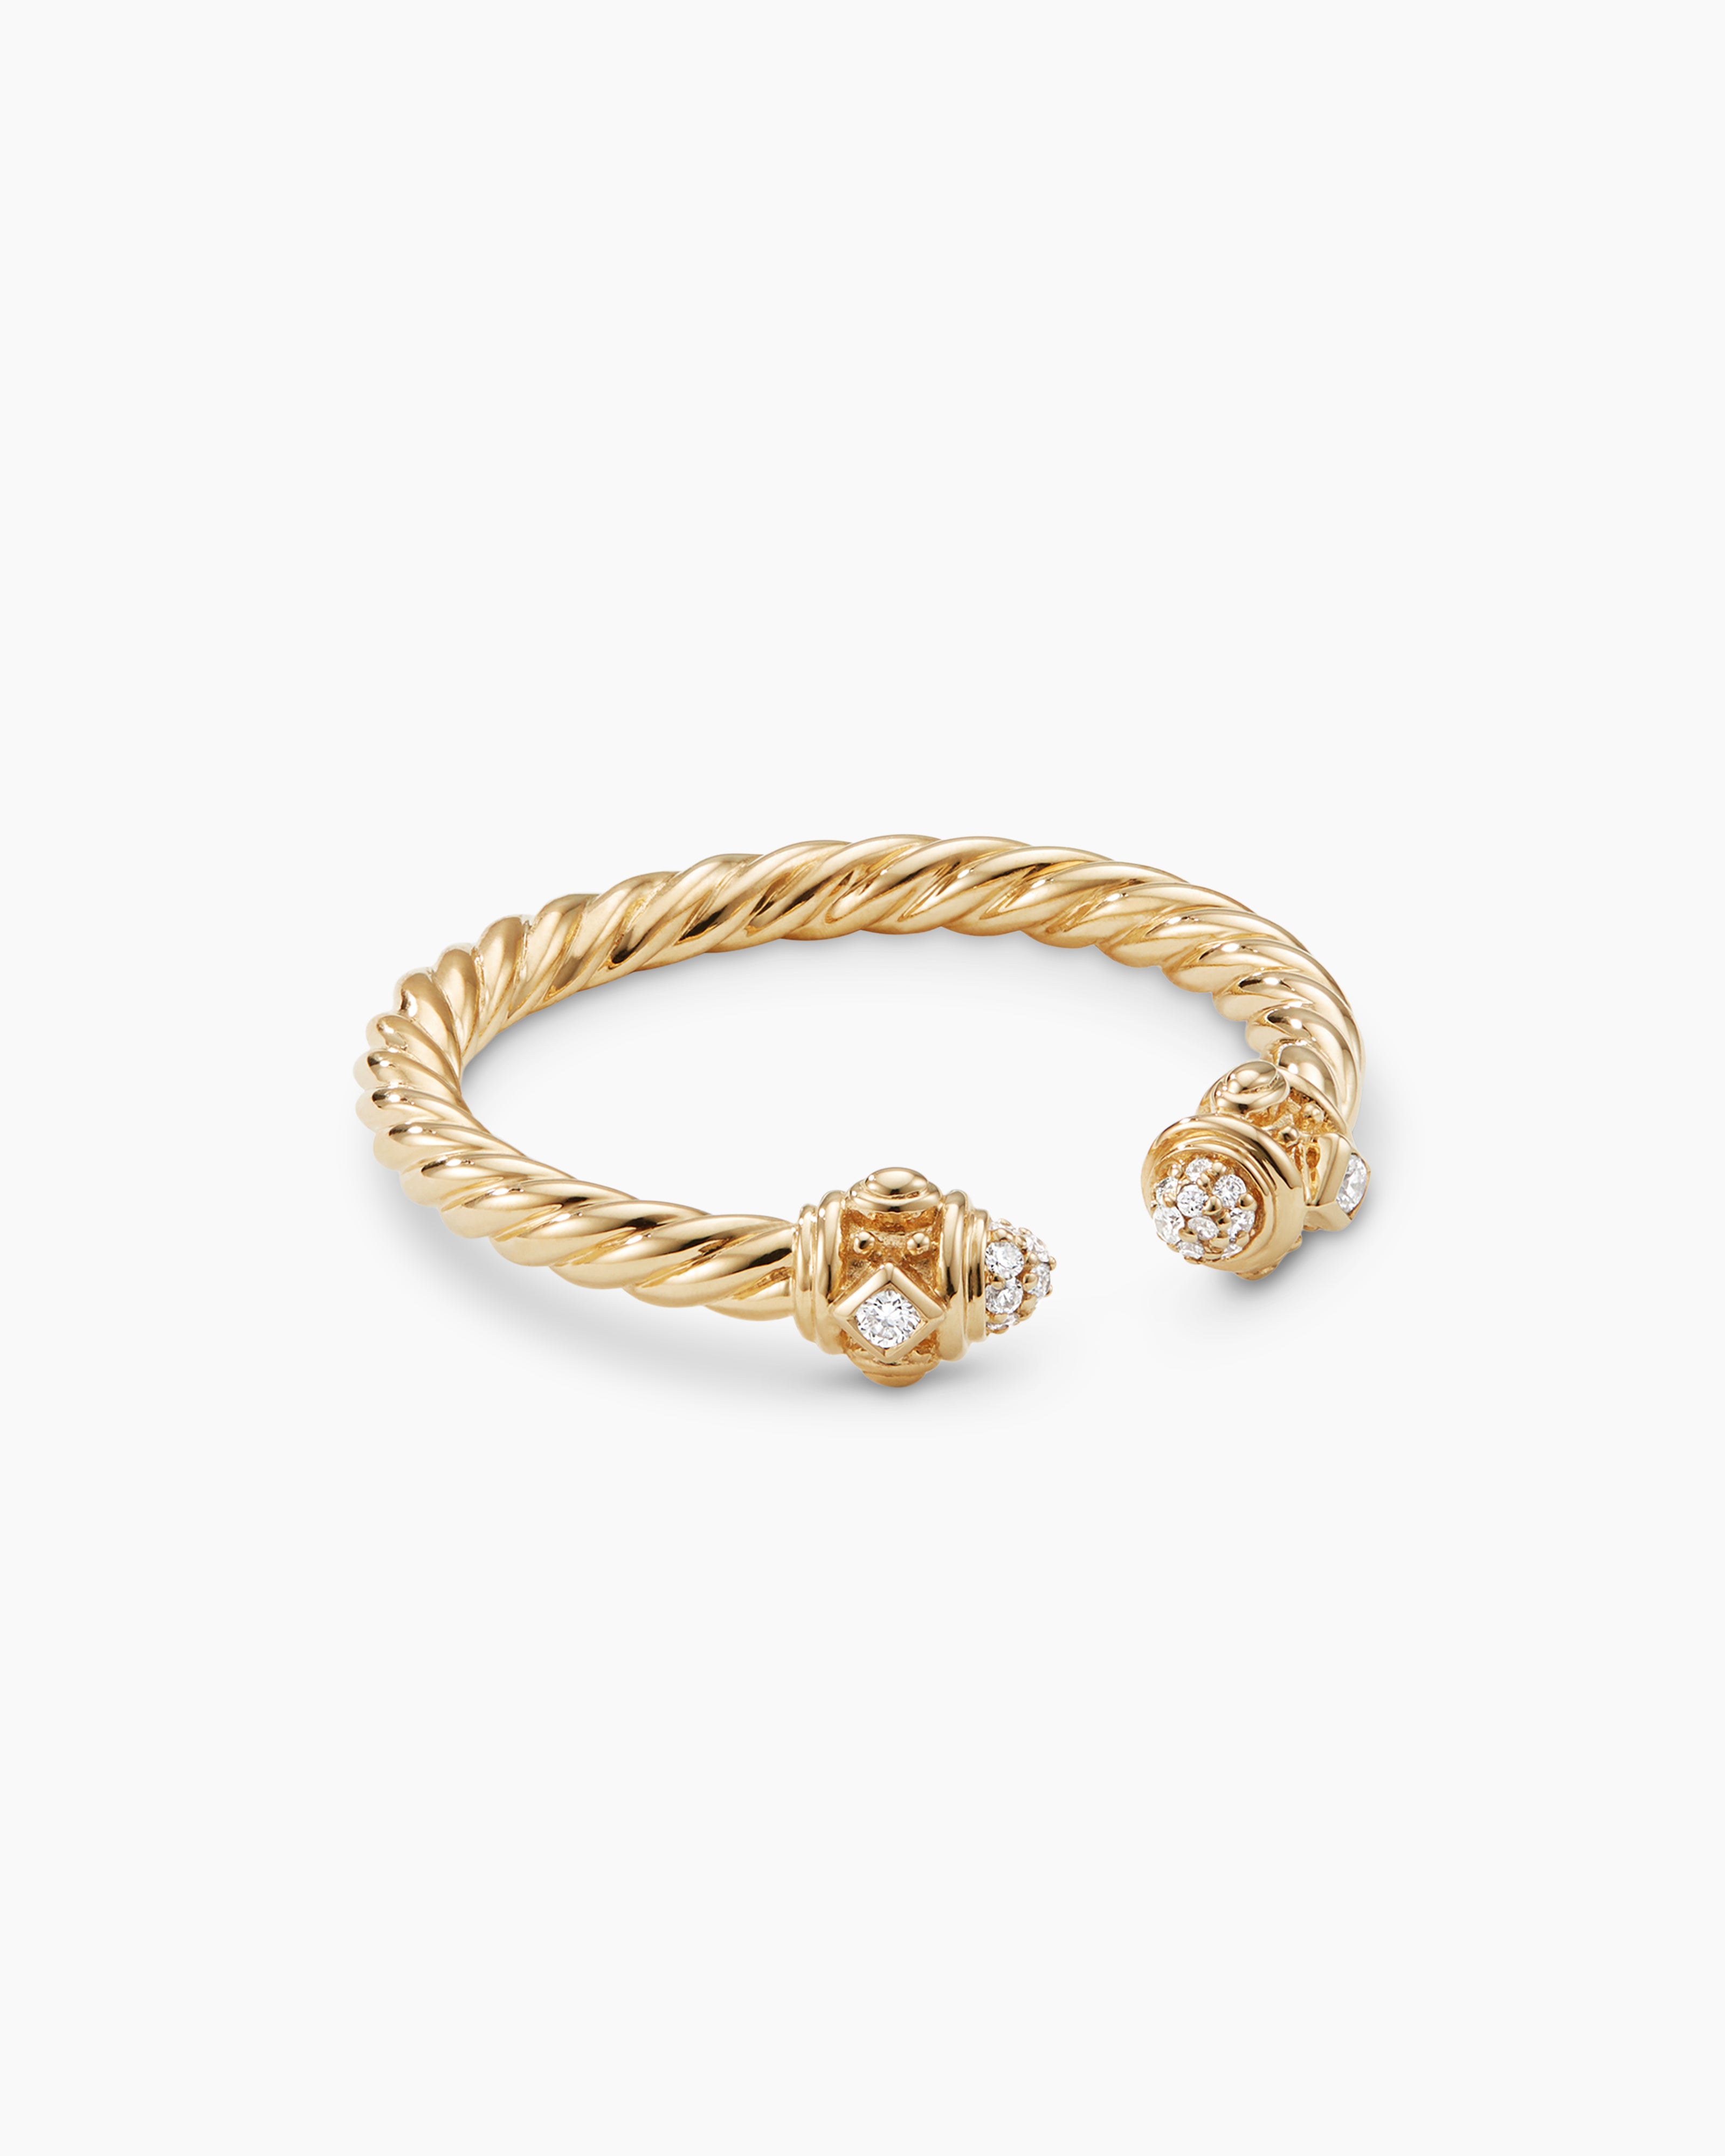 Renaissance Ring in 18K Yellow Gold with Diamonds, 2.3mm | David